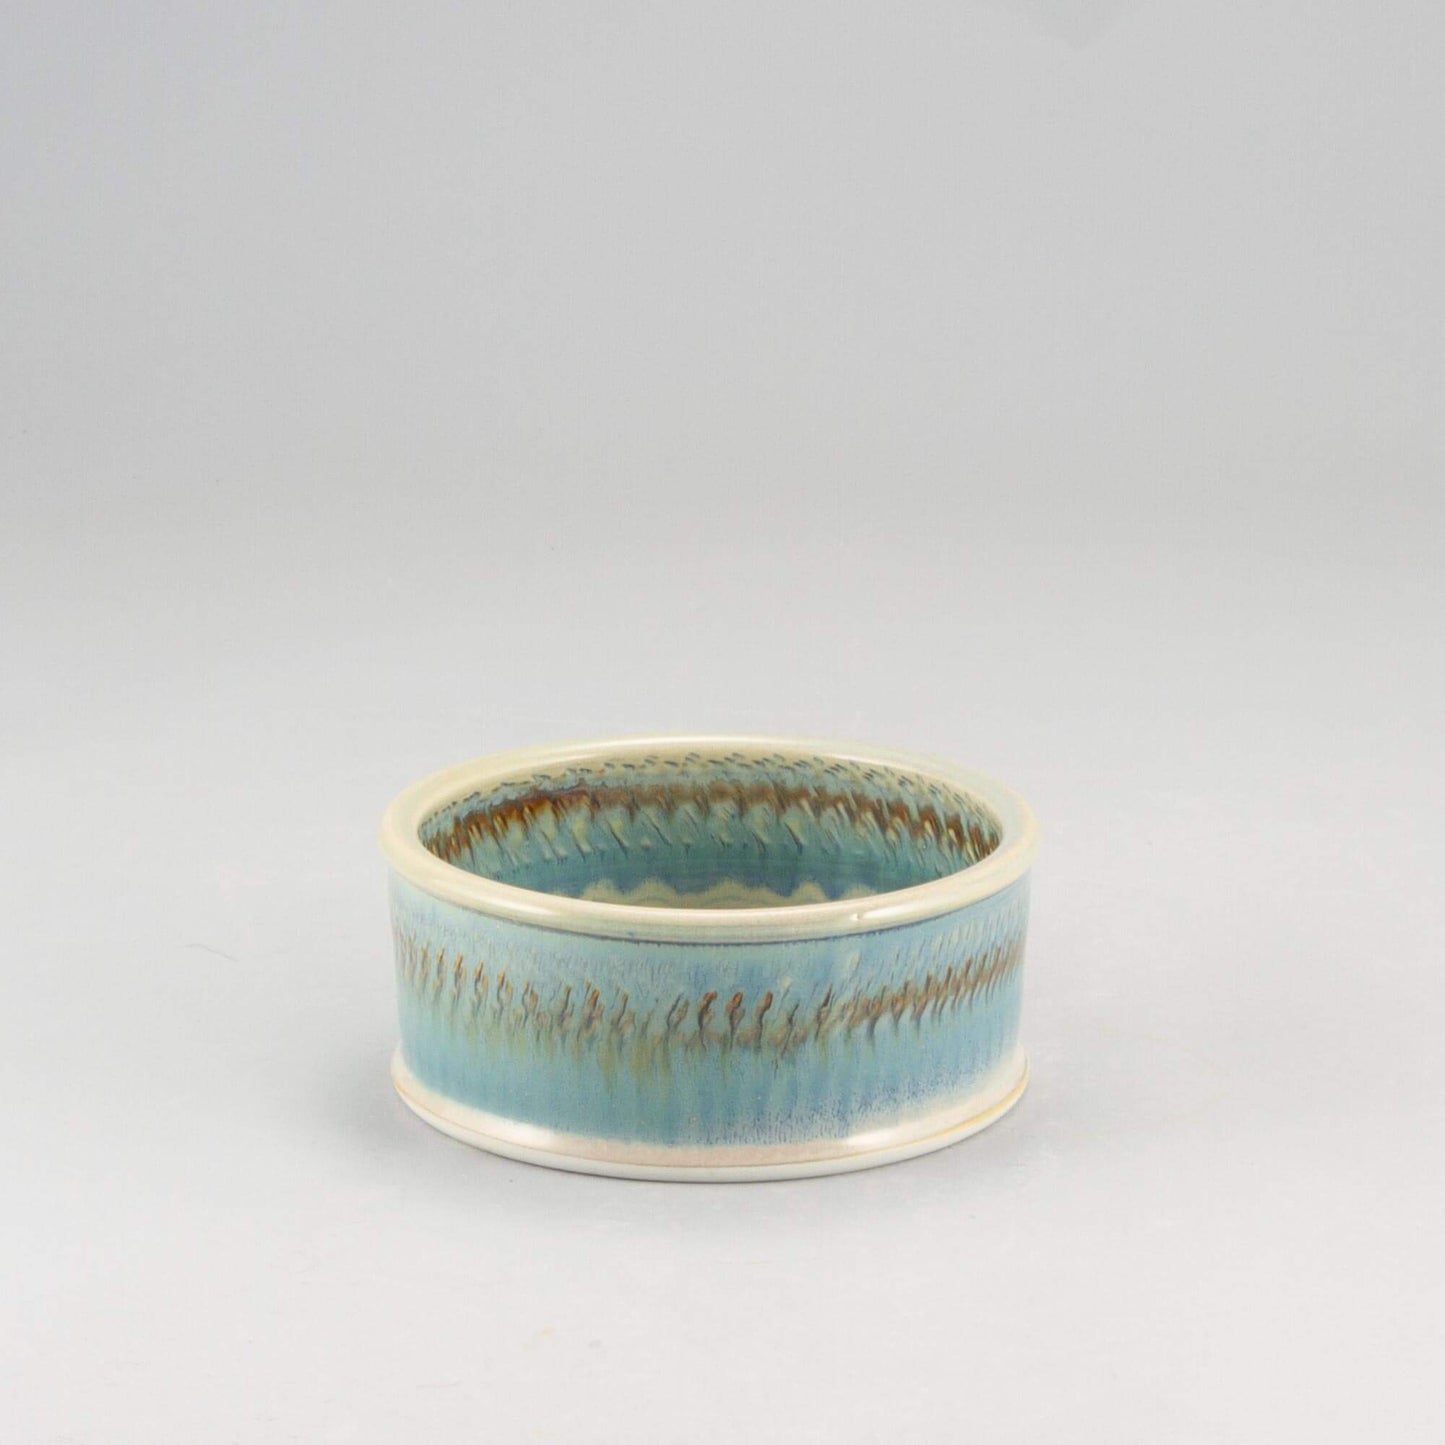 Handmade Pottery Brie Baker in Ivory & Blue pattern made by Georgetown Pottery in Maine